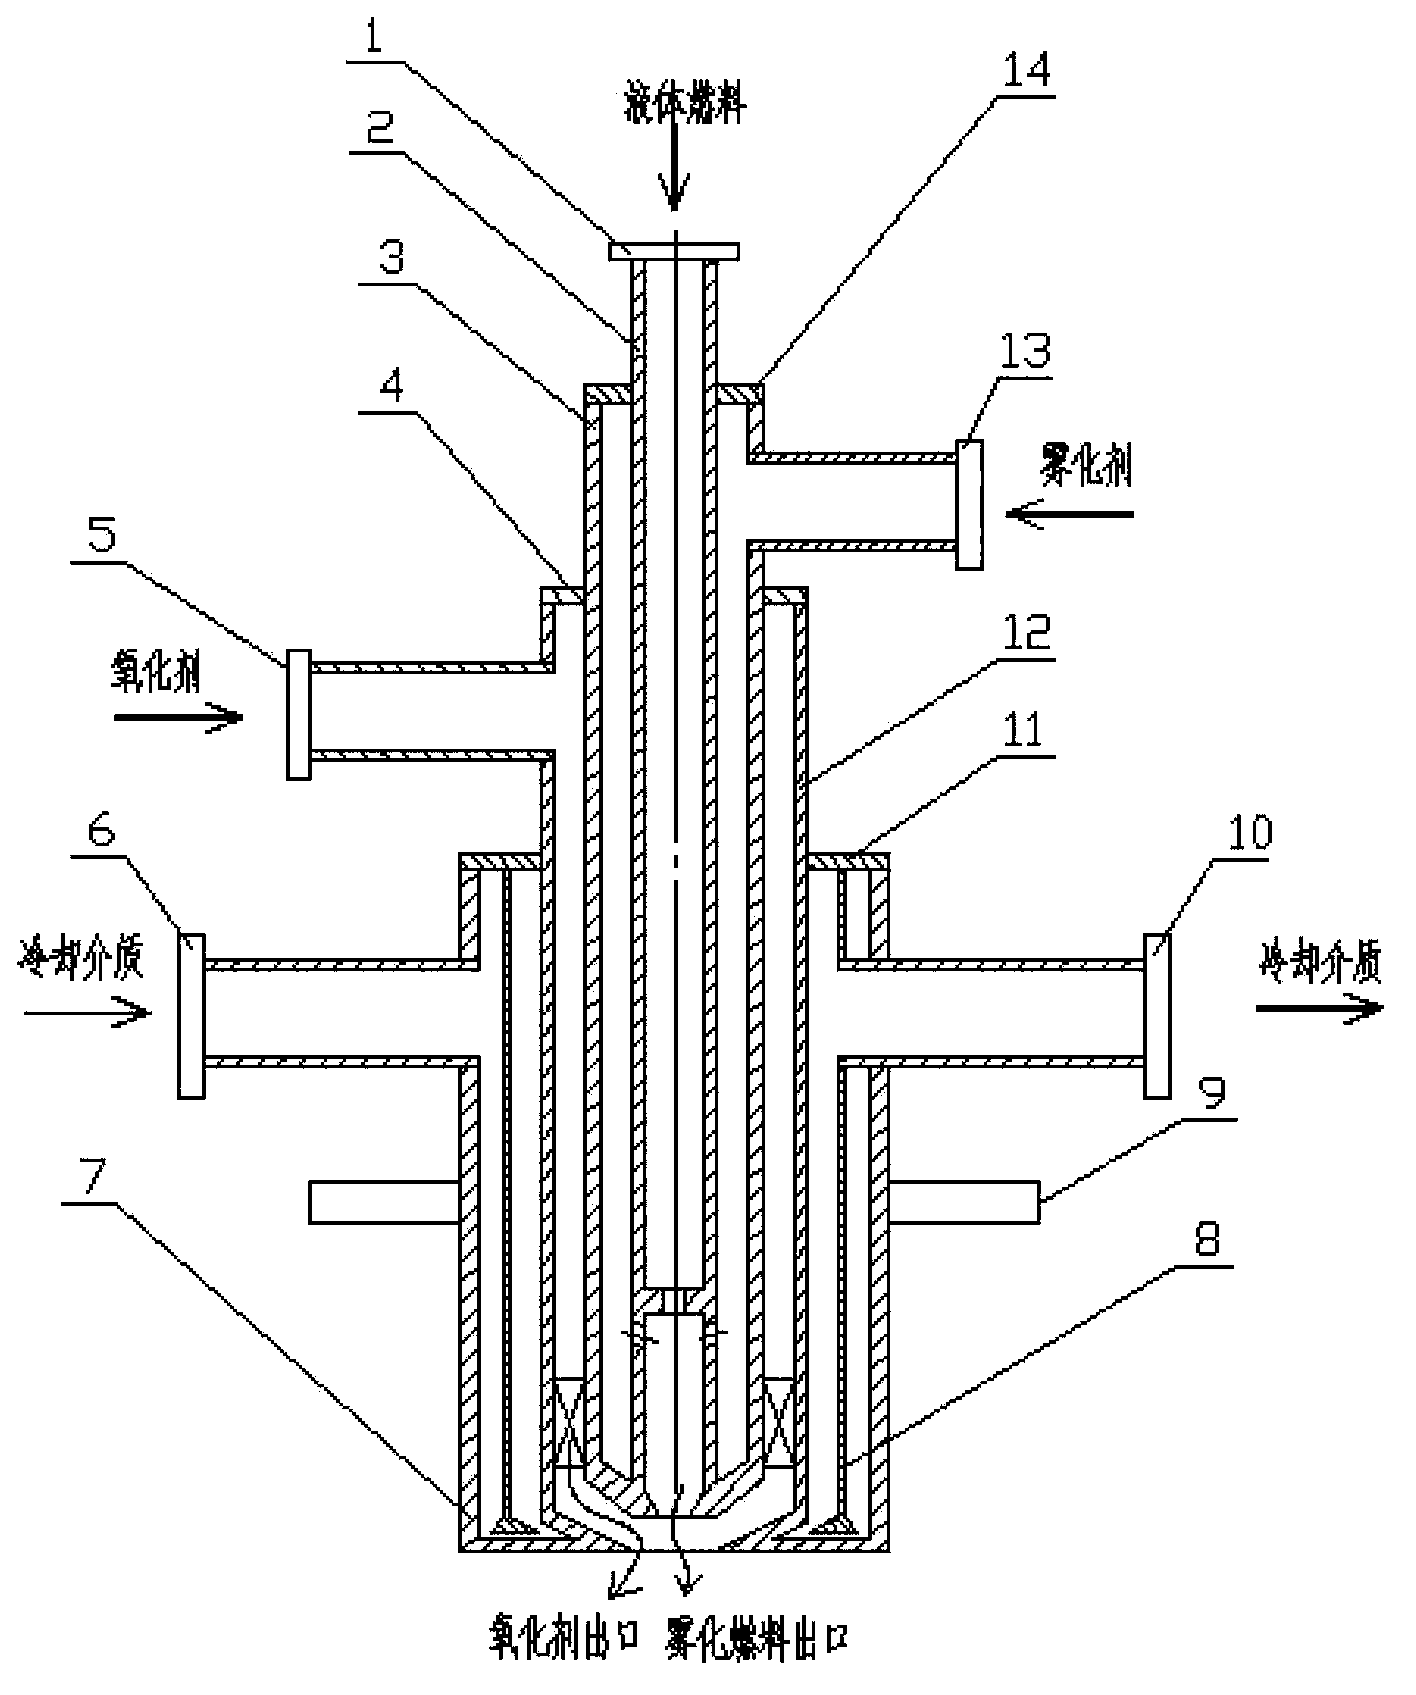 Variable-pressure and variable-working-condition oil burning nozzle